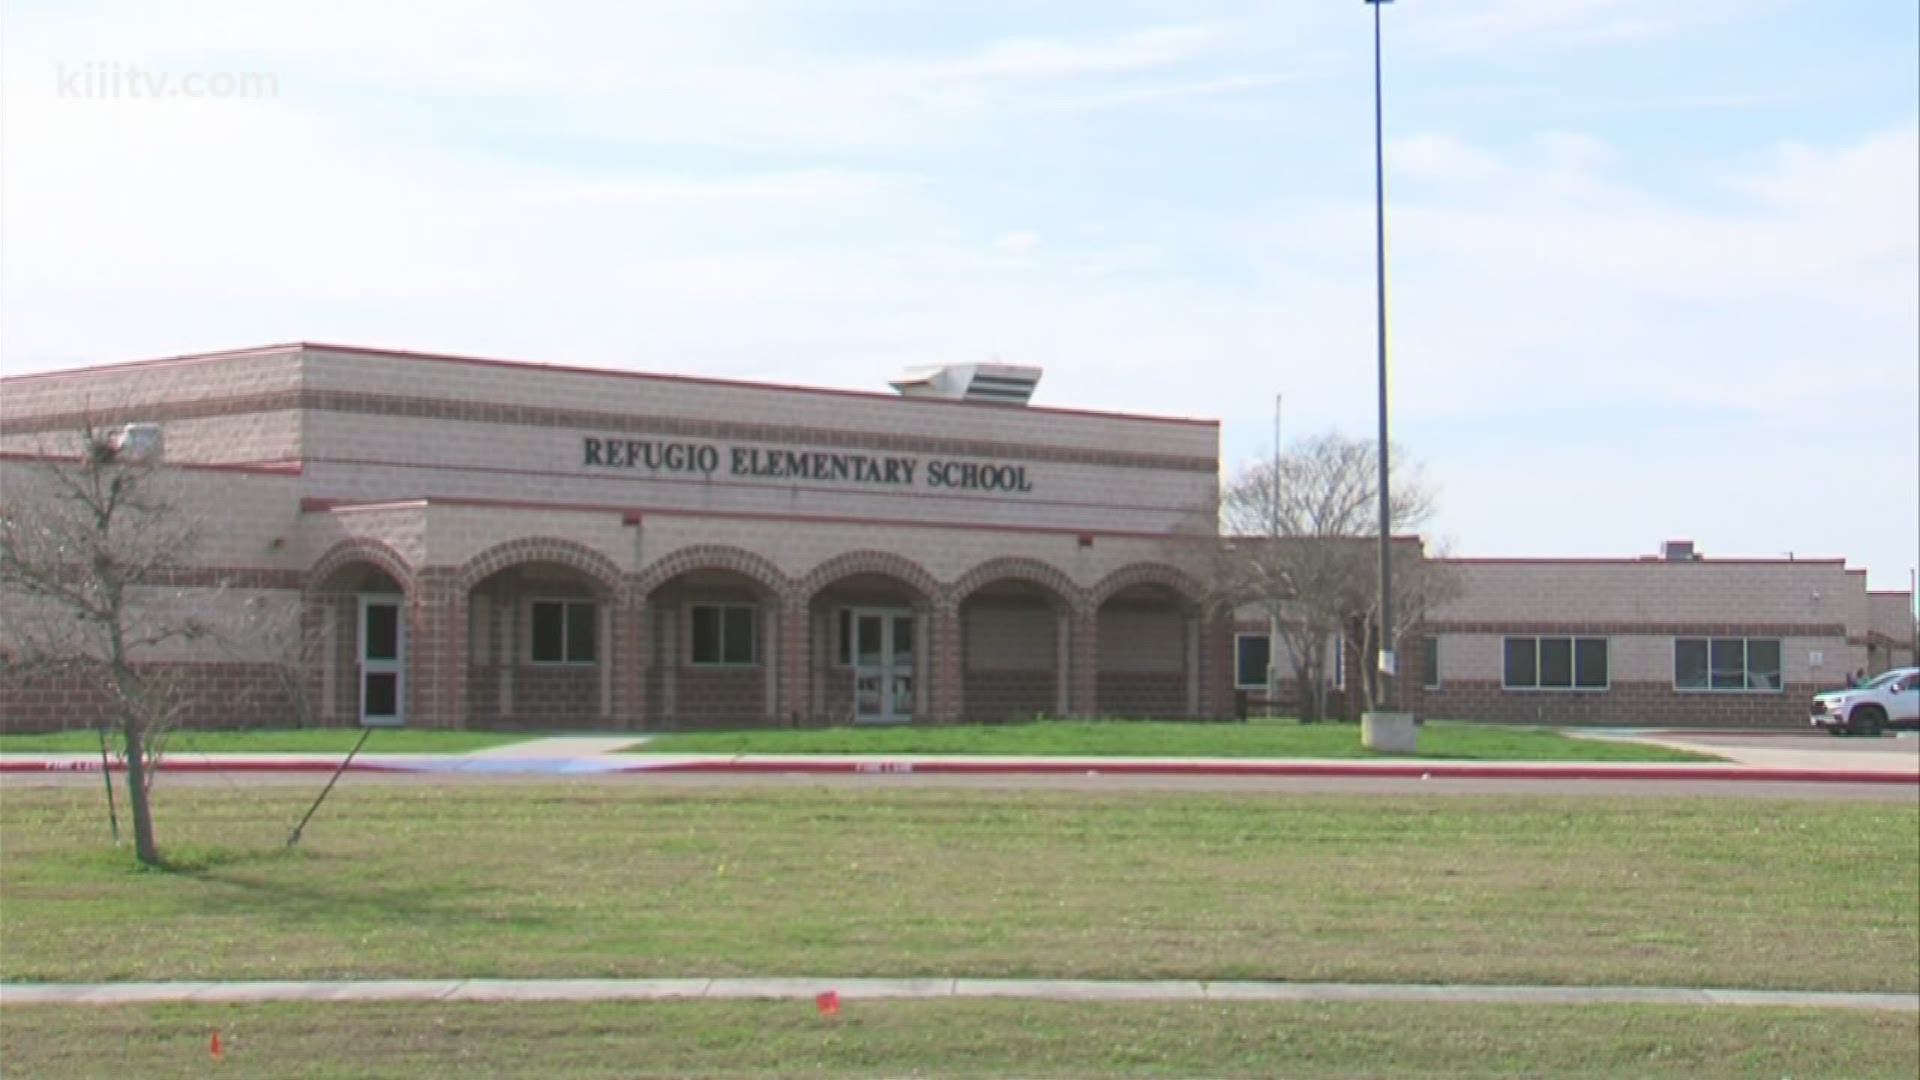 An elementary school in Refugio, Texas, will be open for classes again Wednesday after closing their doors temporarily to deal with a bat problem.